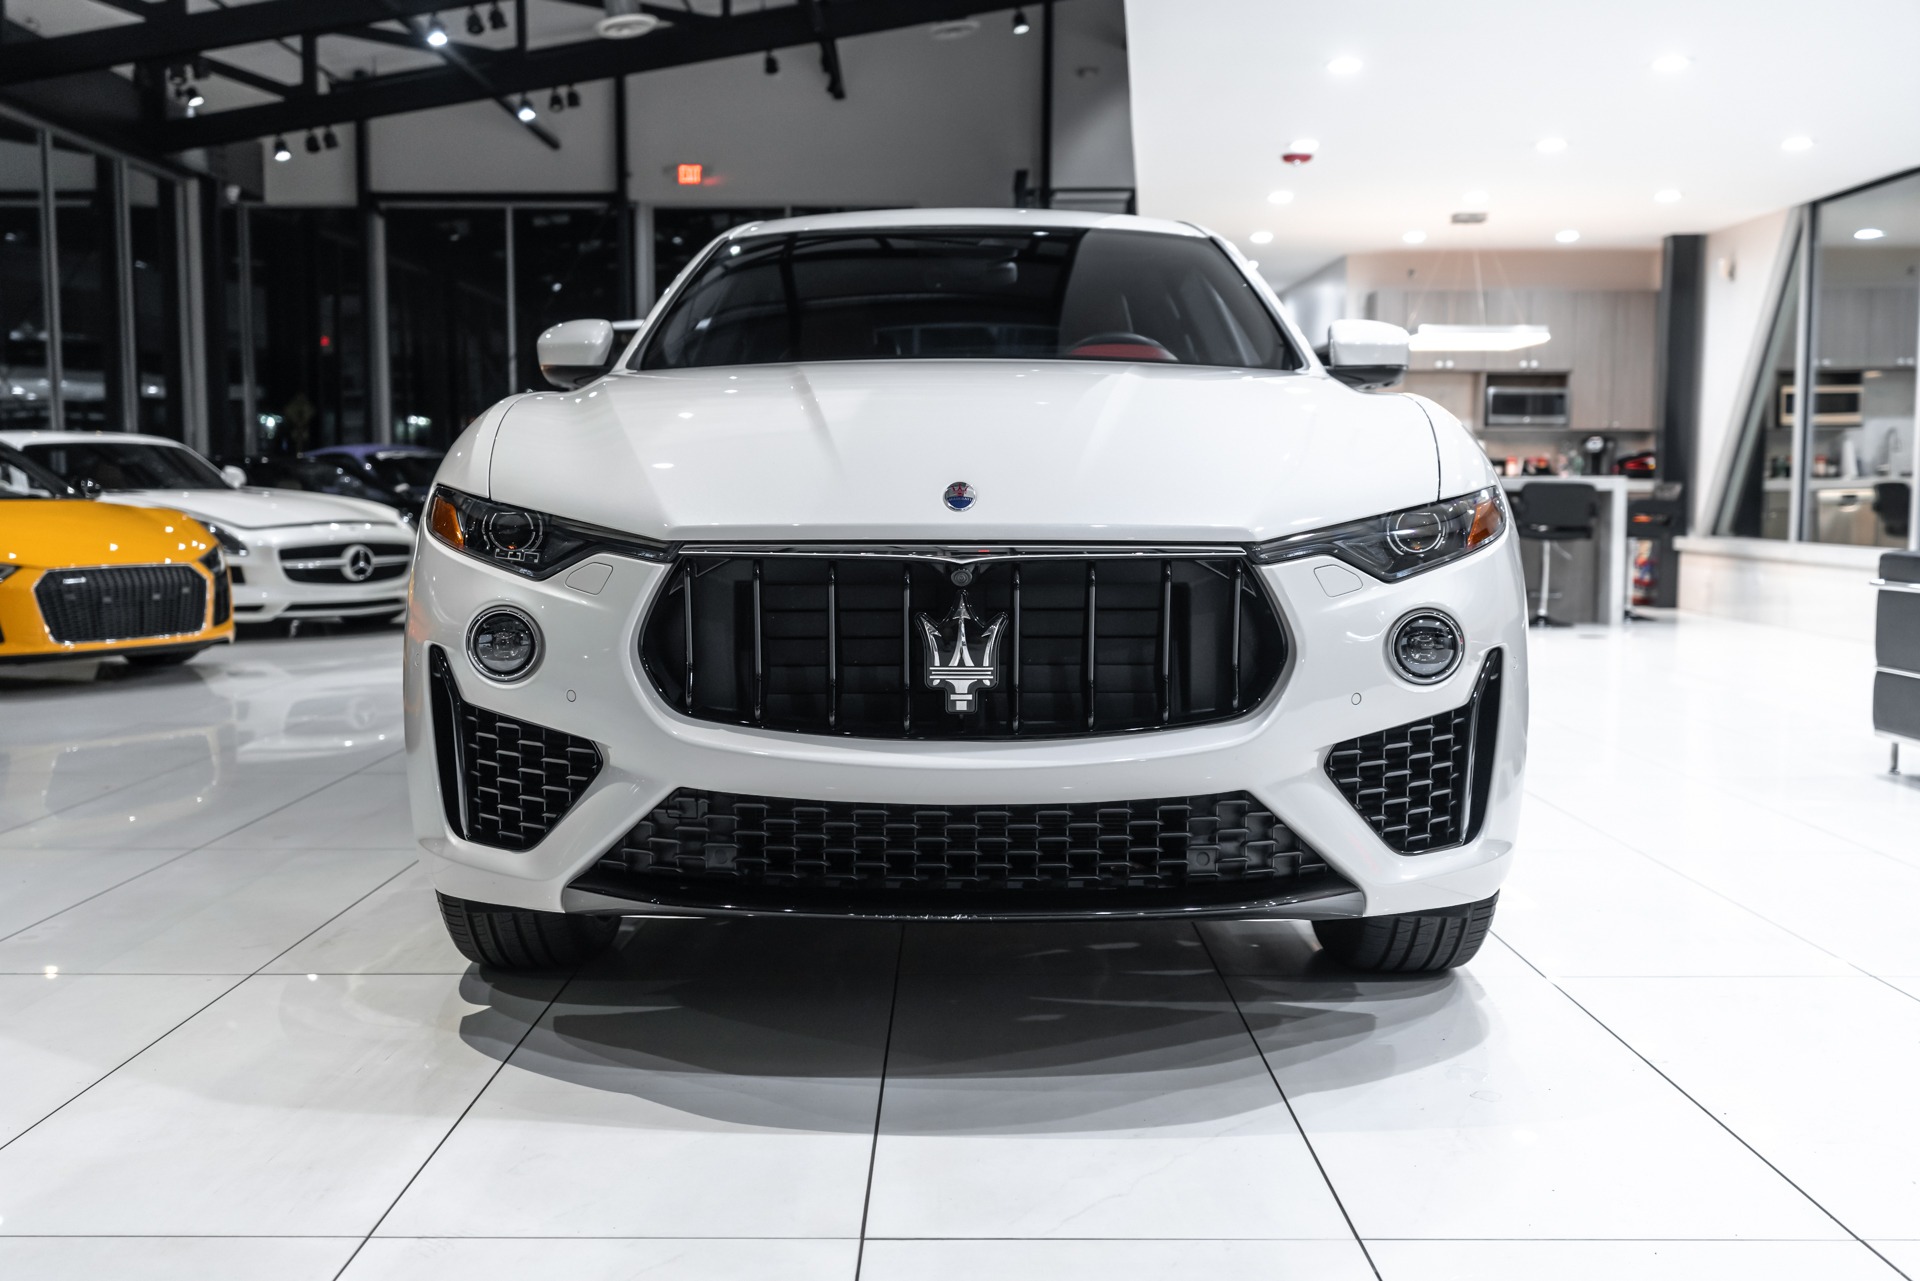 Used-2019-Maserati-Levante-GranSport-AWD-SUV-Driver-Assist-Pack-GORGEOUS-Color-Combo-Tri-Coat-Paint